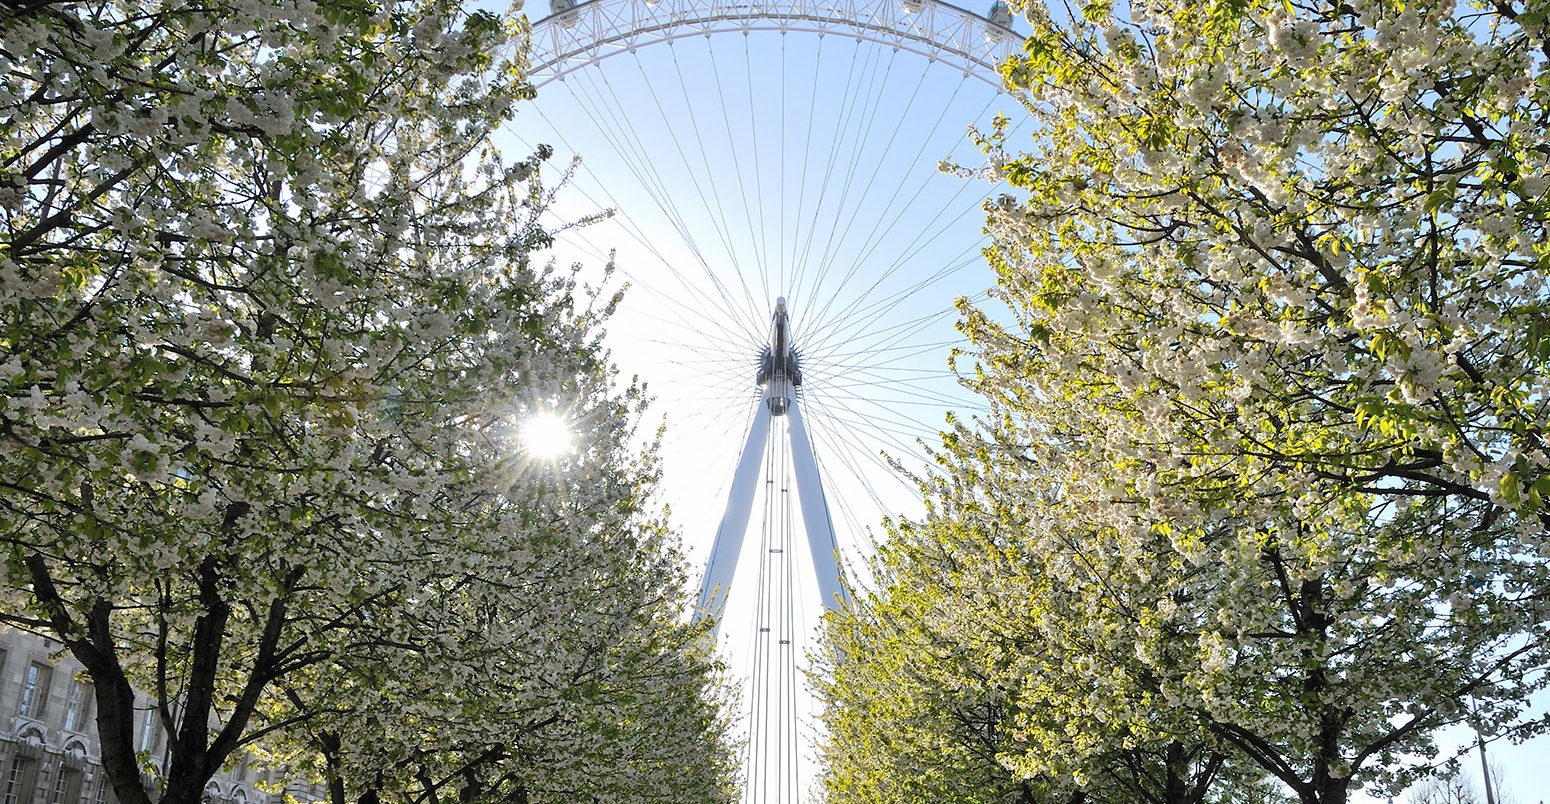 London Eye and blossom trees in spring. Credit: Richard Barnes / Alamy Stock Photo. D79E7B